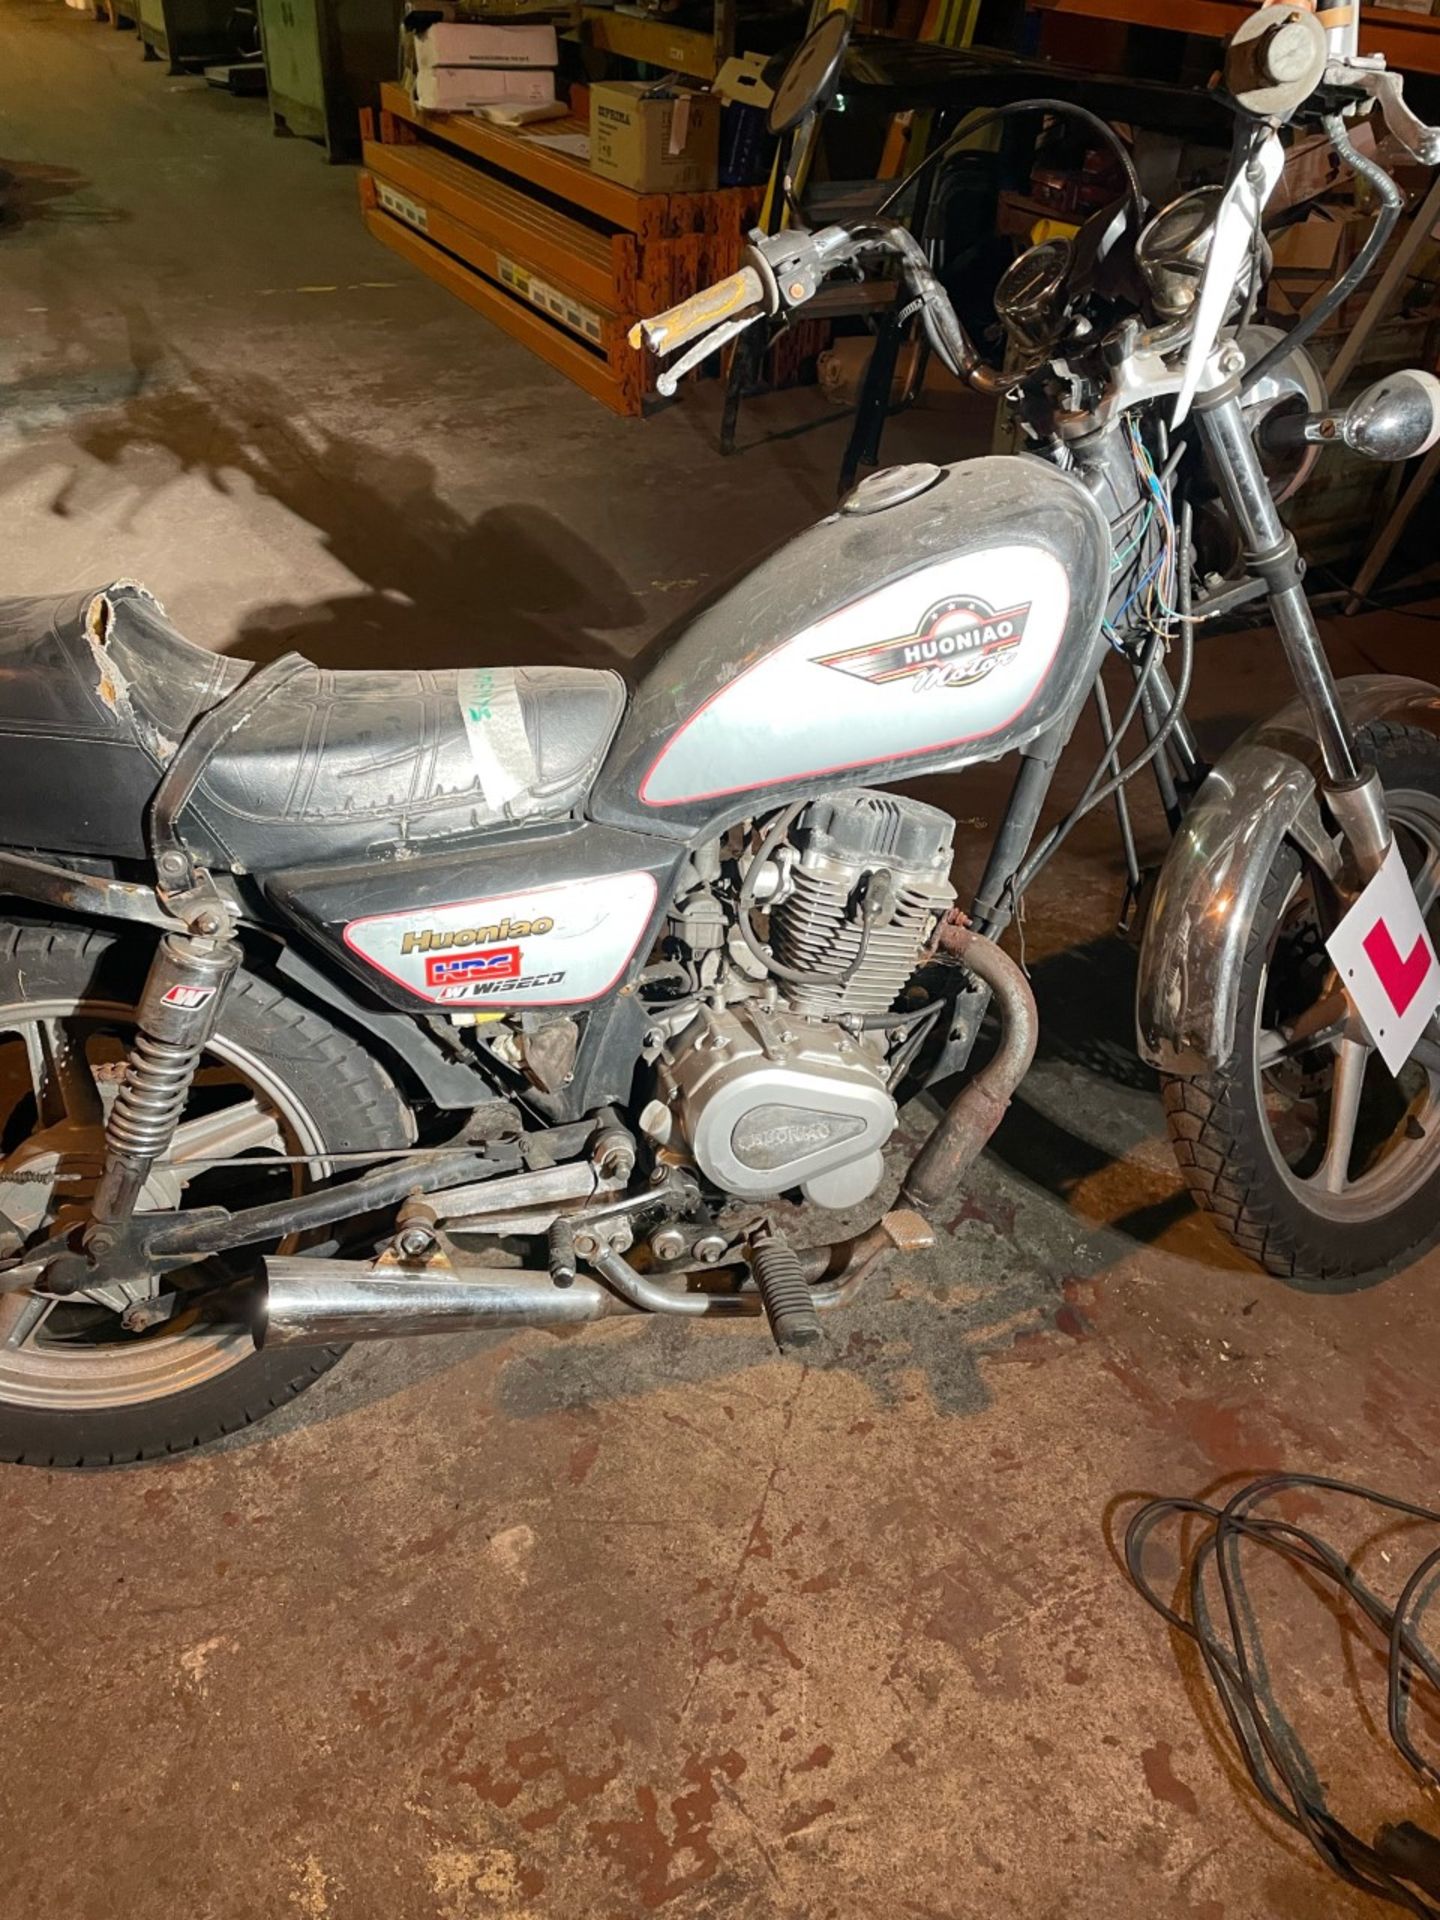 Huoniao HN125 motorcycle 2011 model. Selling as spares or repair. Bike can be a good project bike - Image 2 of 6